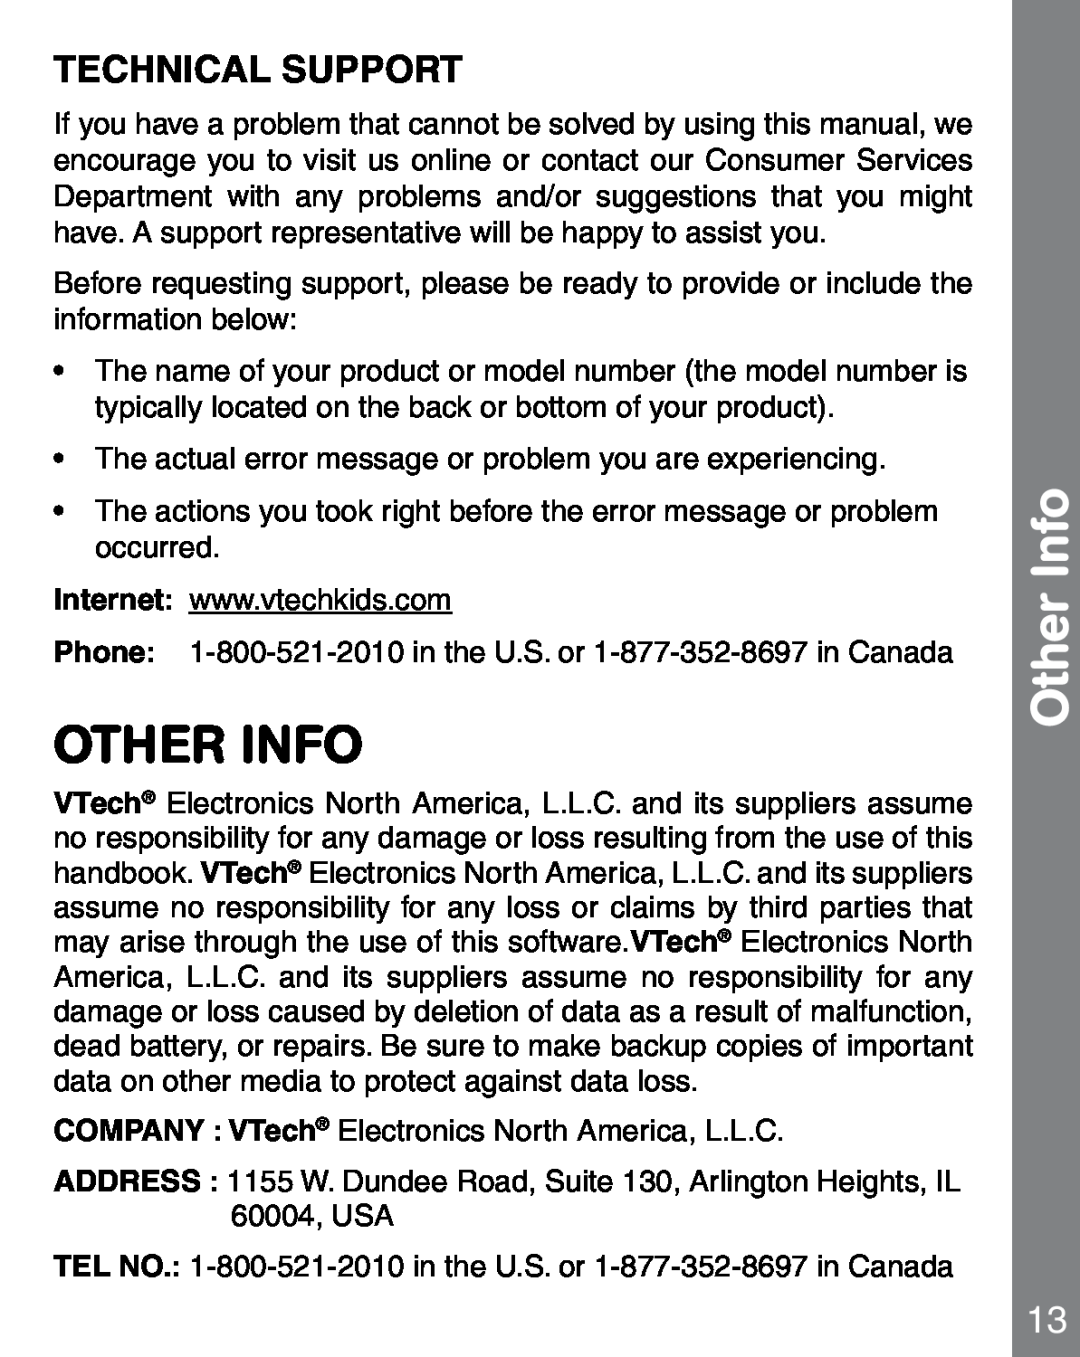 VTech 91-02241-000 manual Other Info, Technical Support 